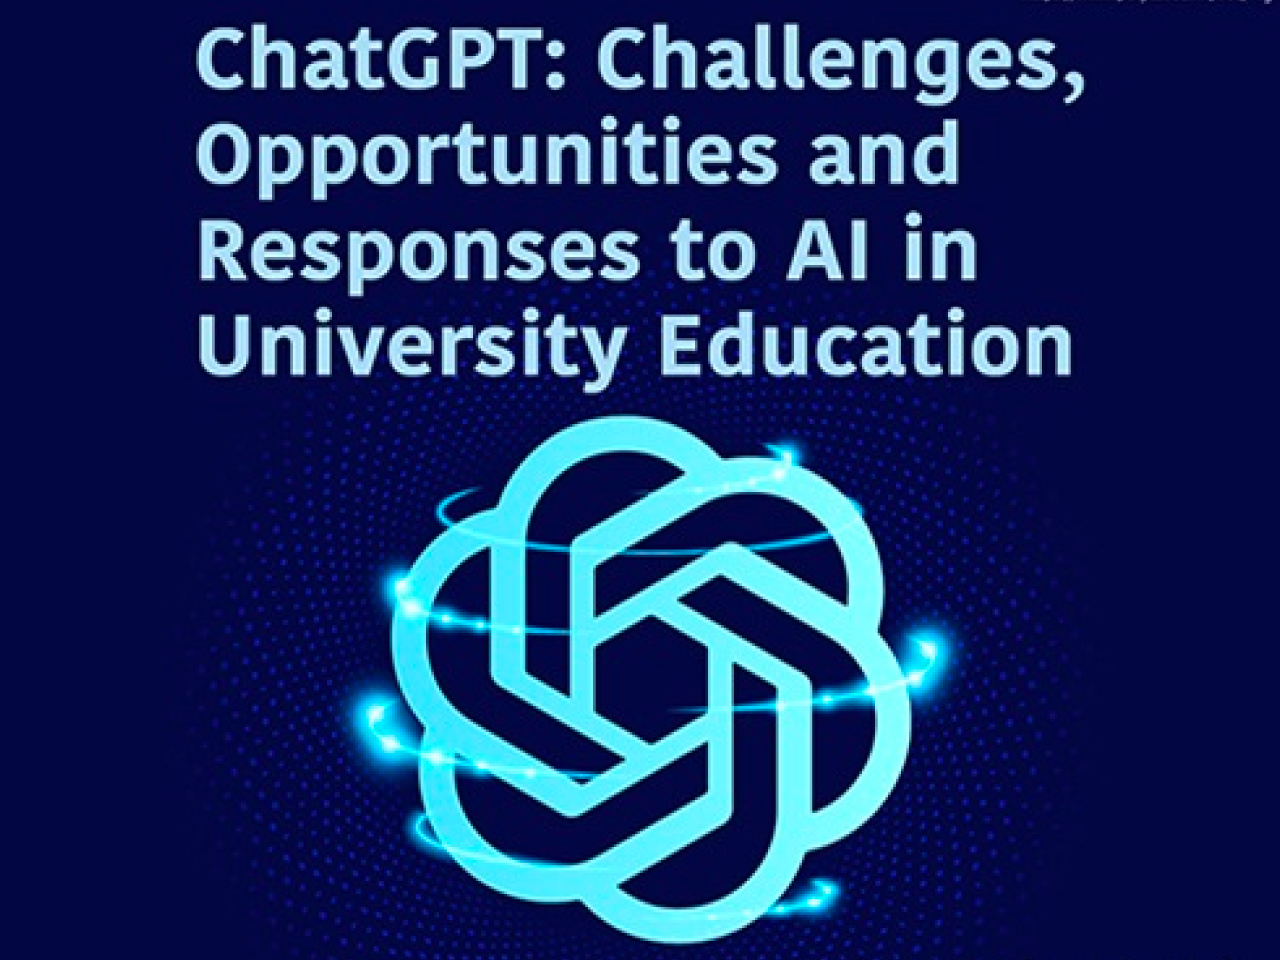 ChatGPT: Challenges, Opportunities and Responses to AI in University Education